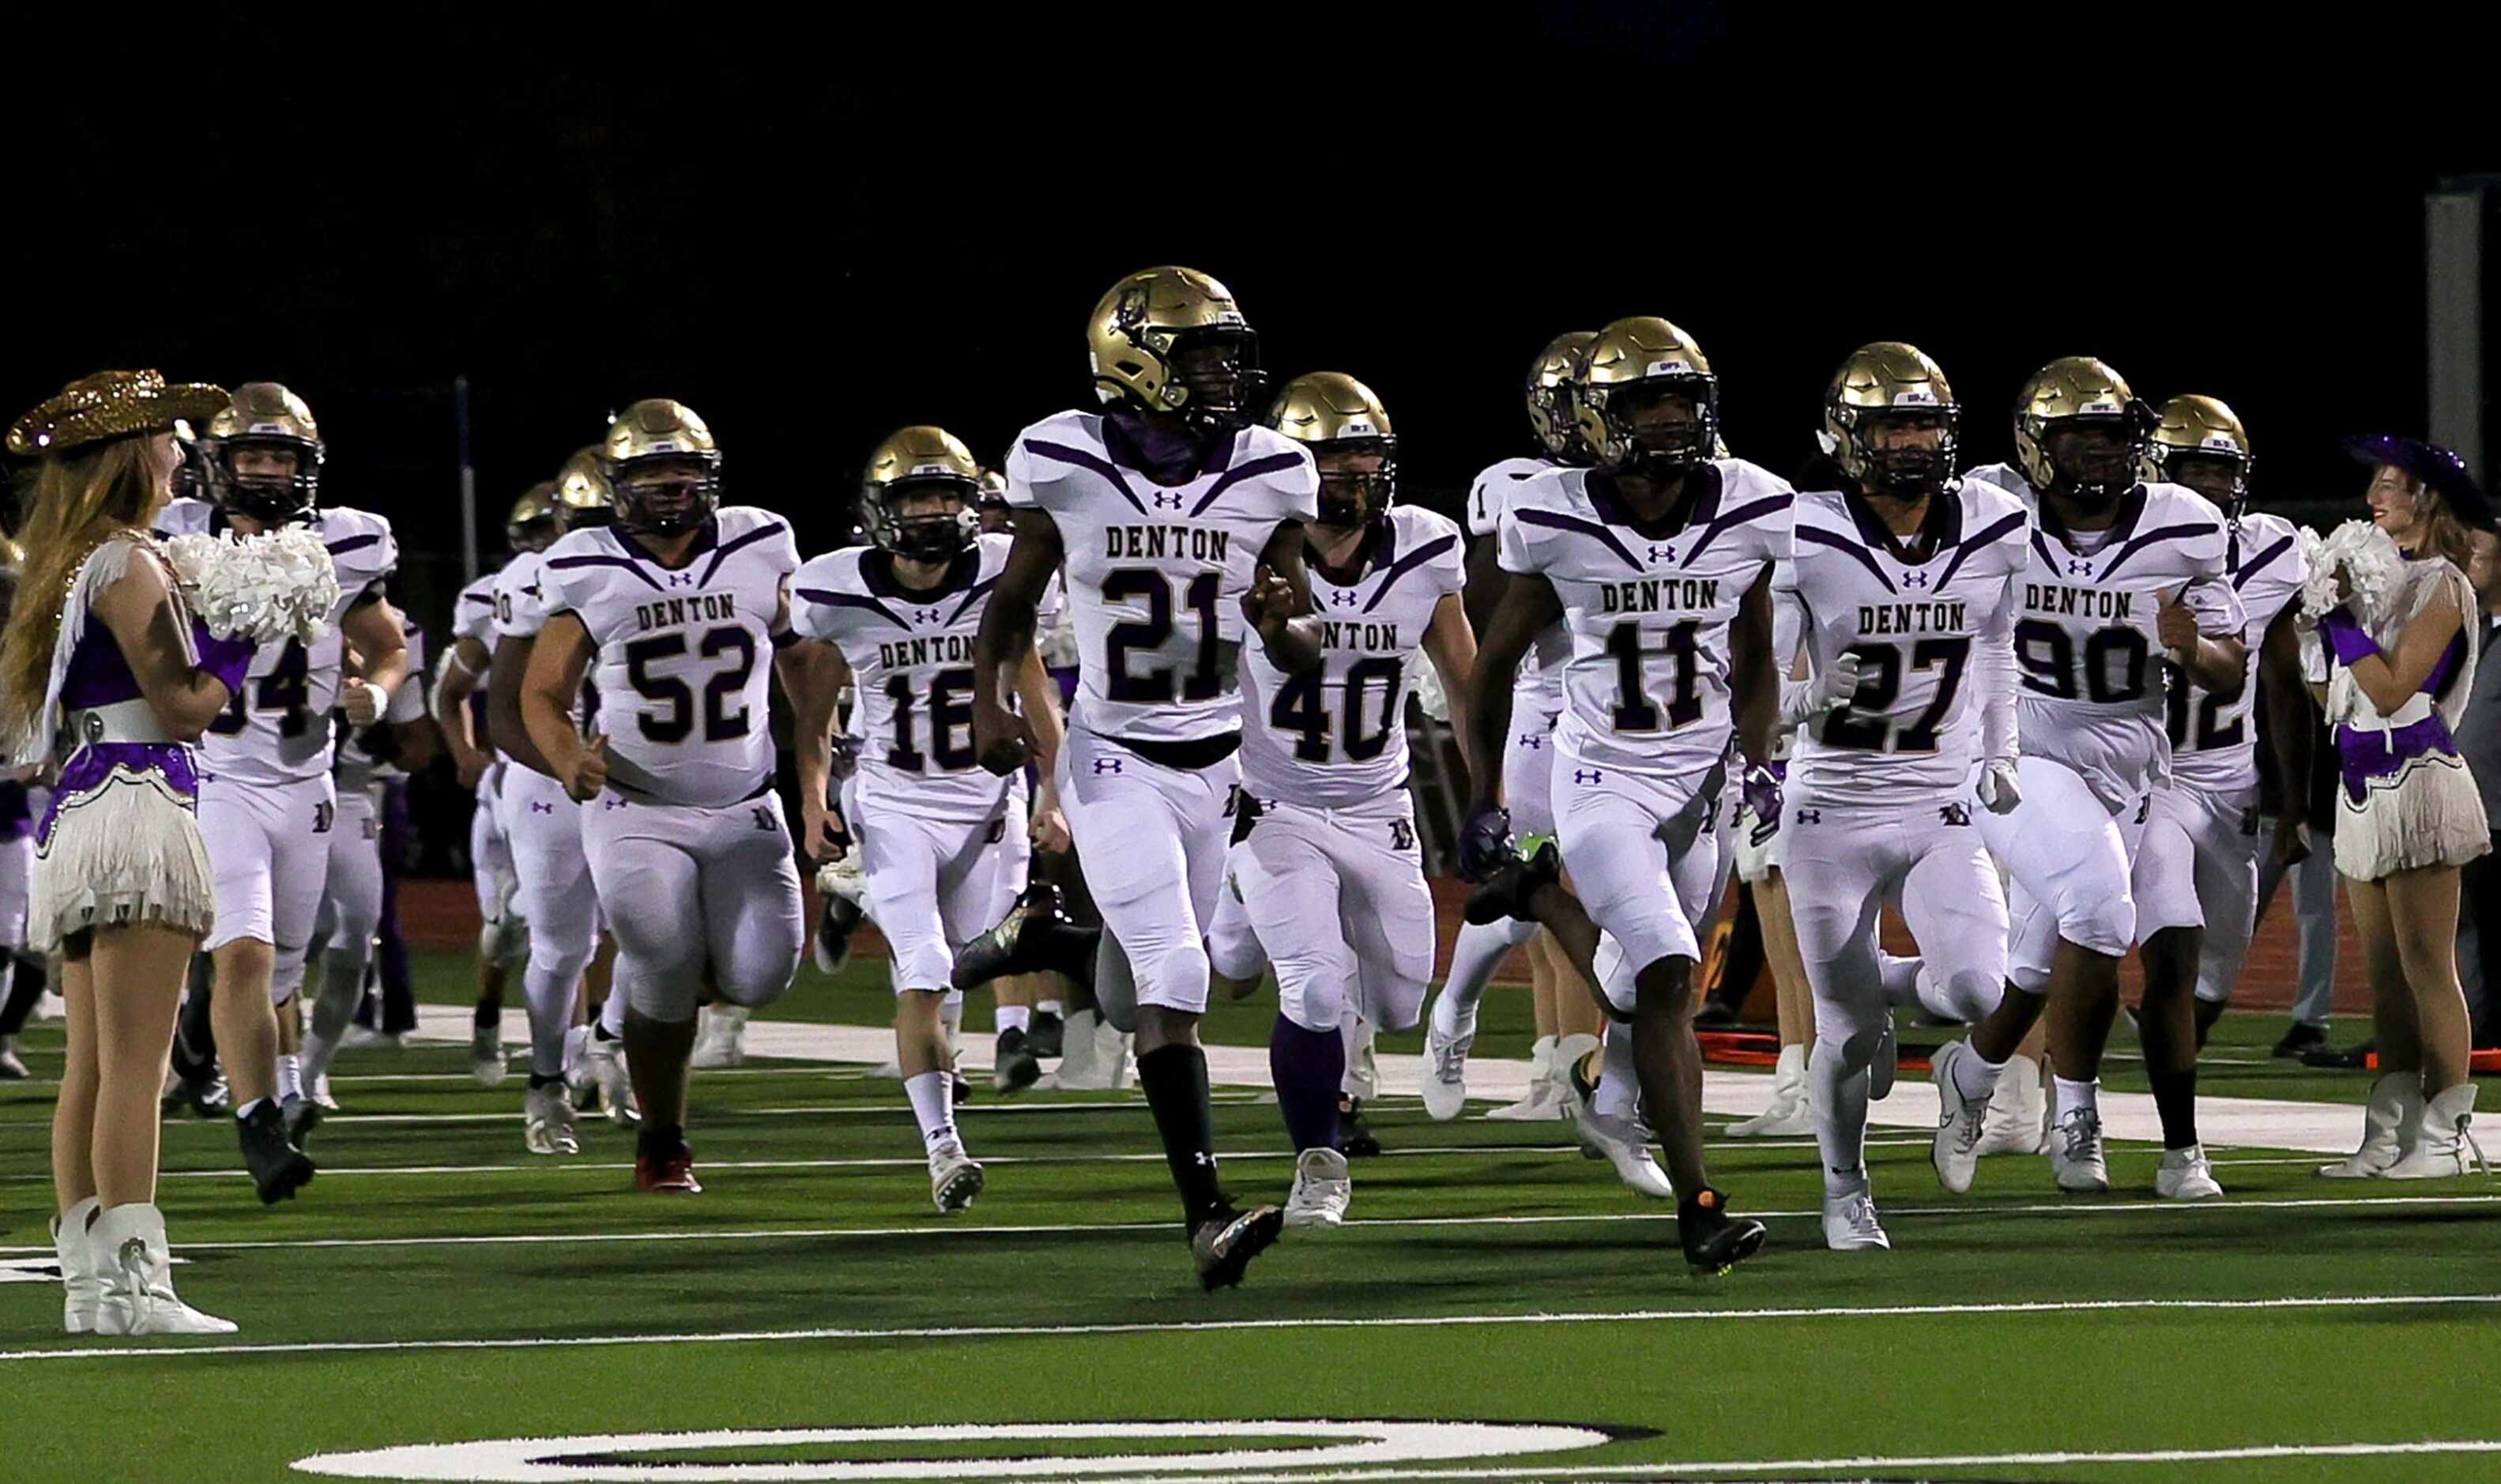 The Denton Broncos enter the field to face Lake Dallas in a District 3-5A Division II High...